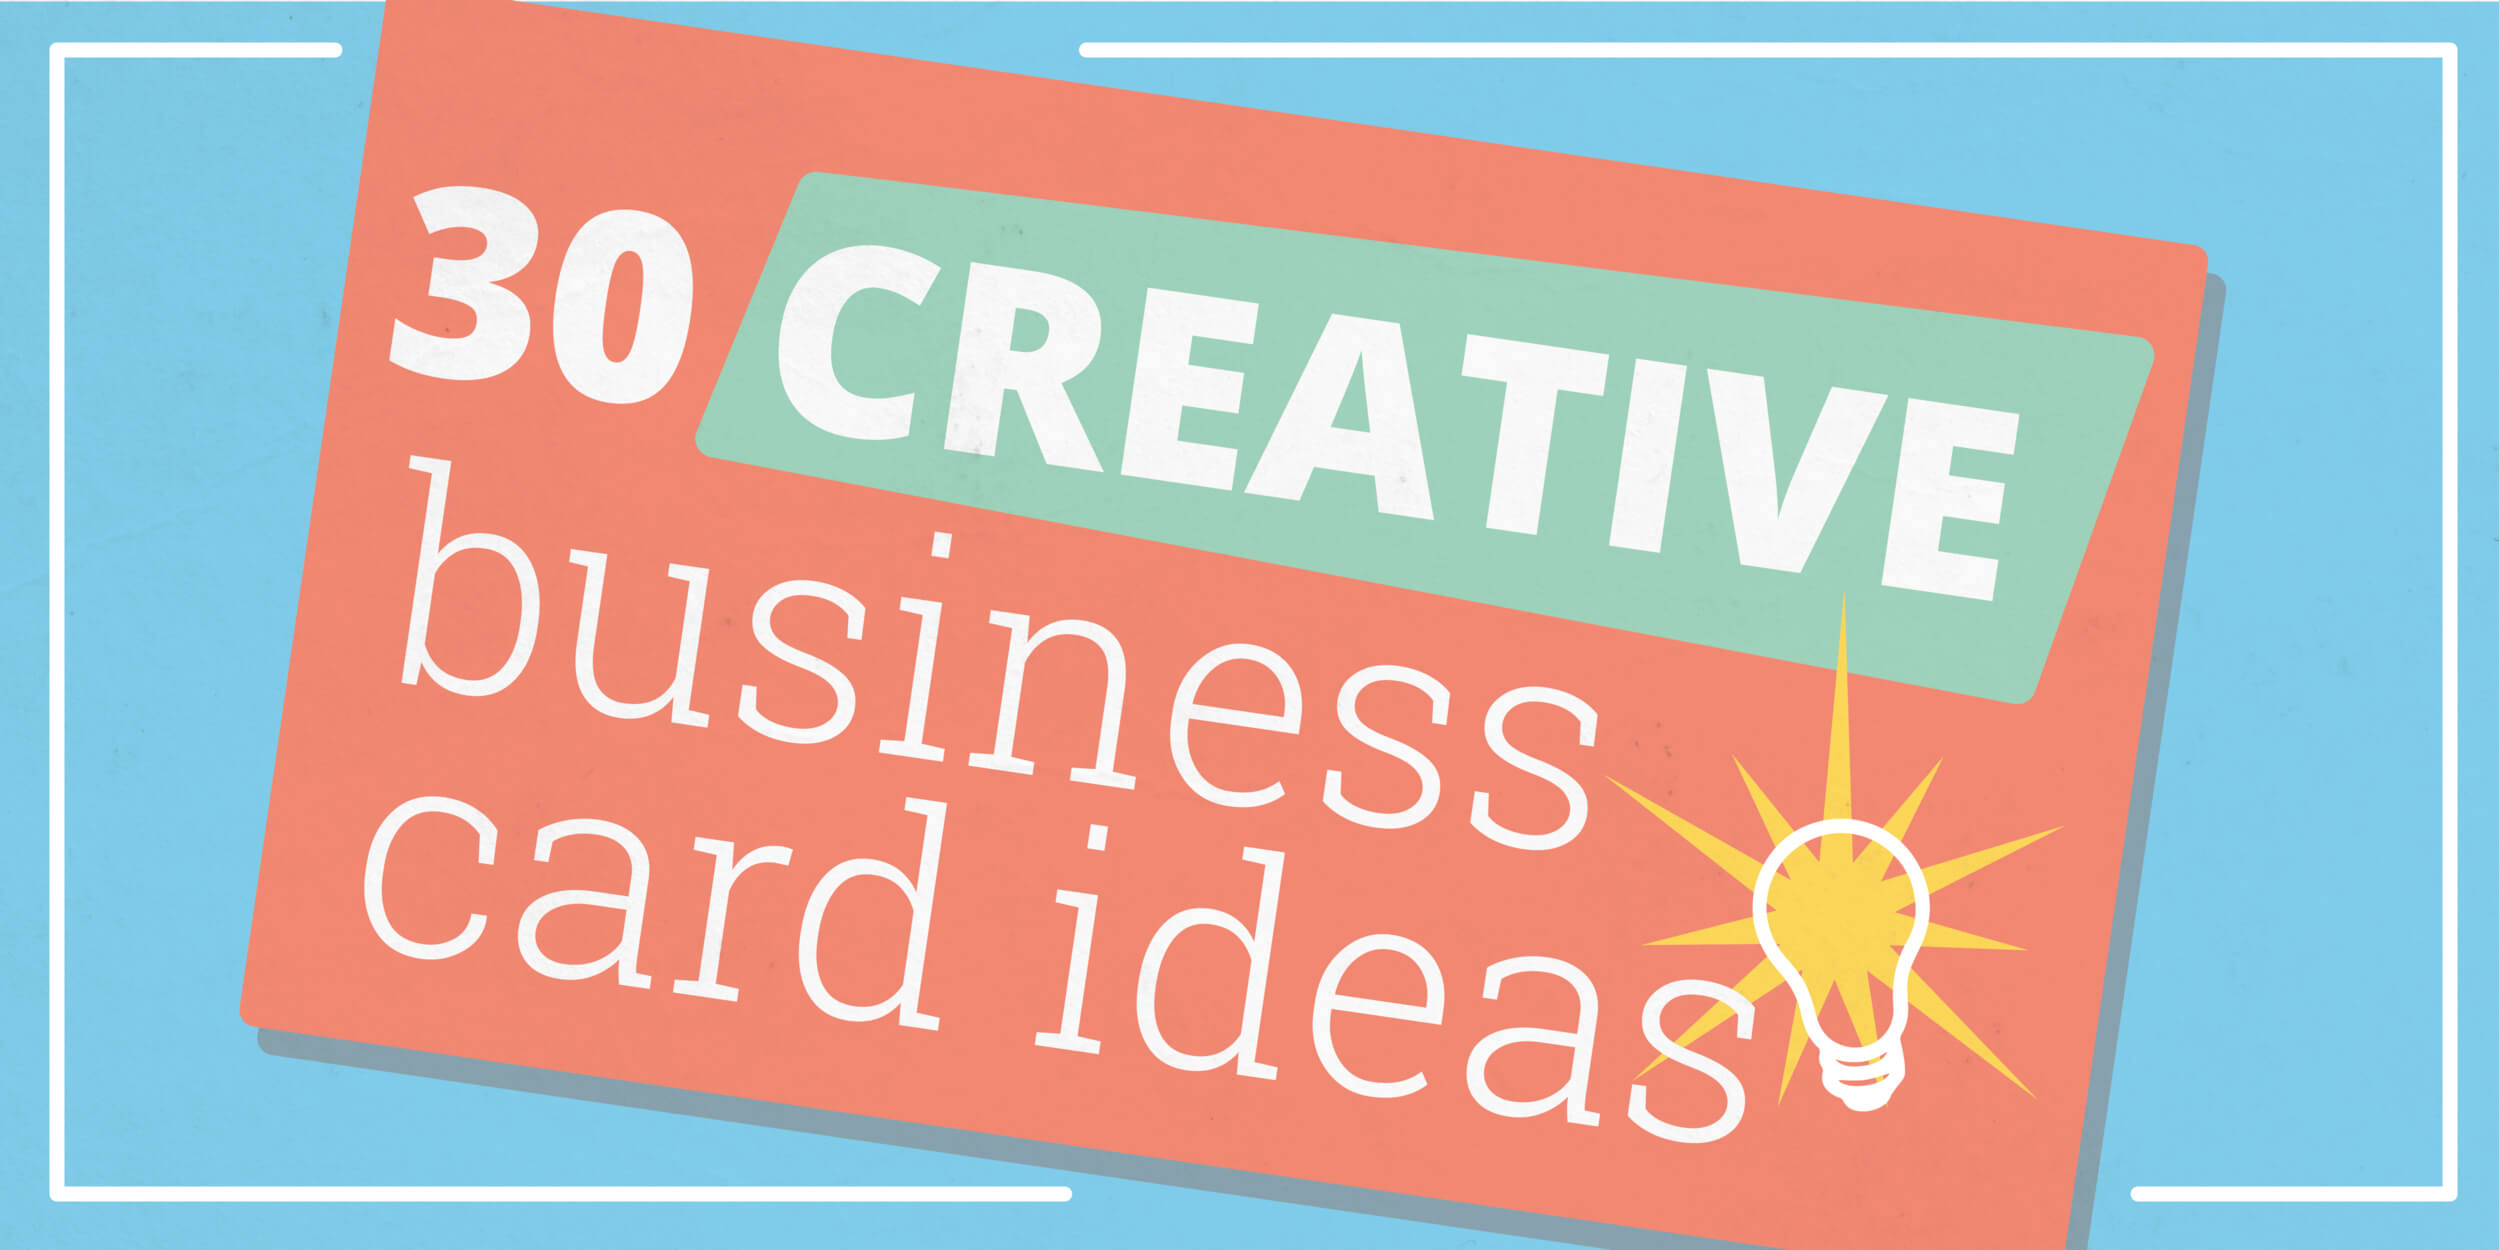 30 Creative Business Card Ideas & Designs | Lucidpress With Business Cards For Teachers Templates Free